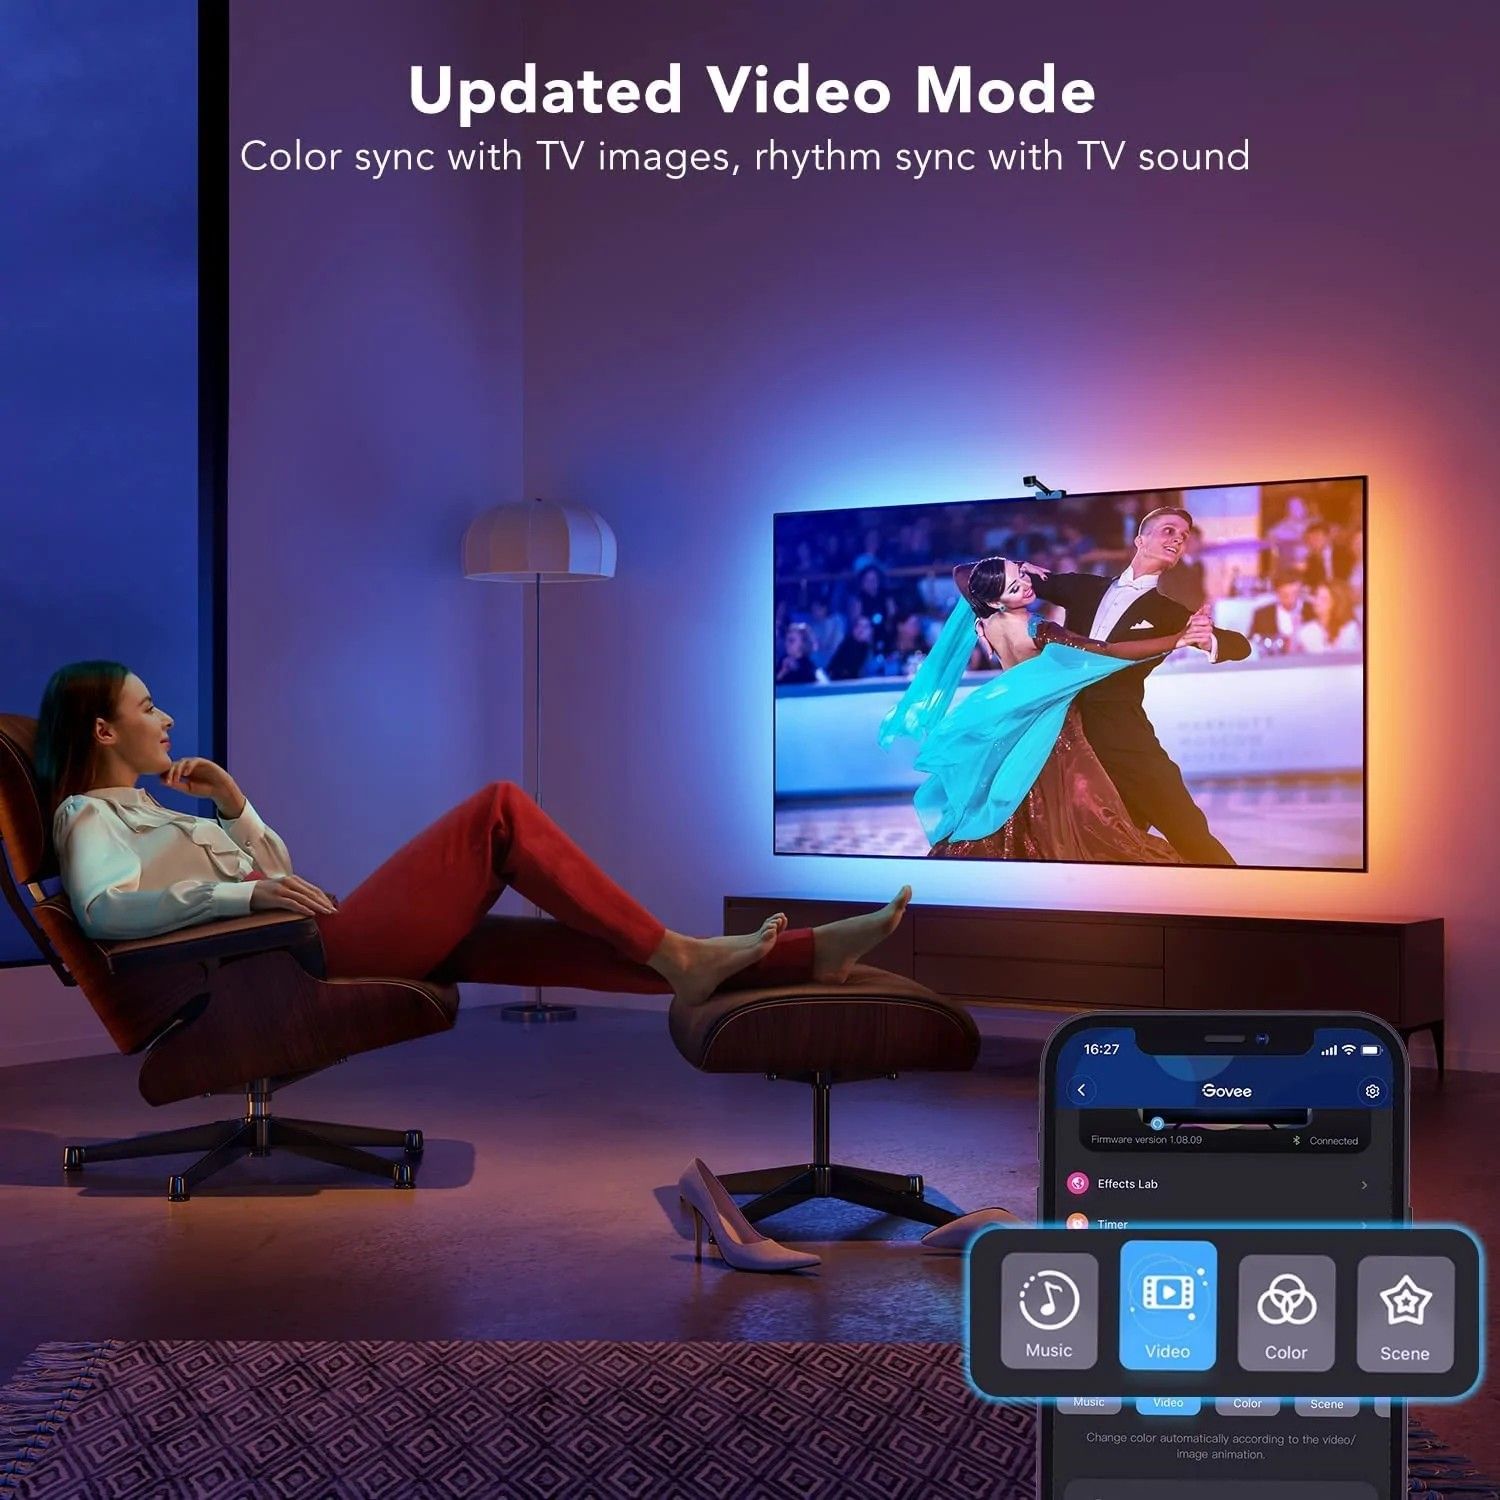 Govee DreamView T1 TV Backlight adaptive modes